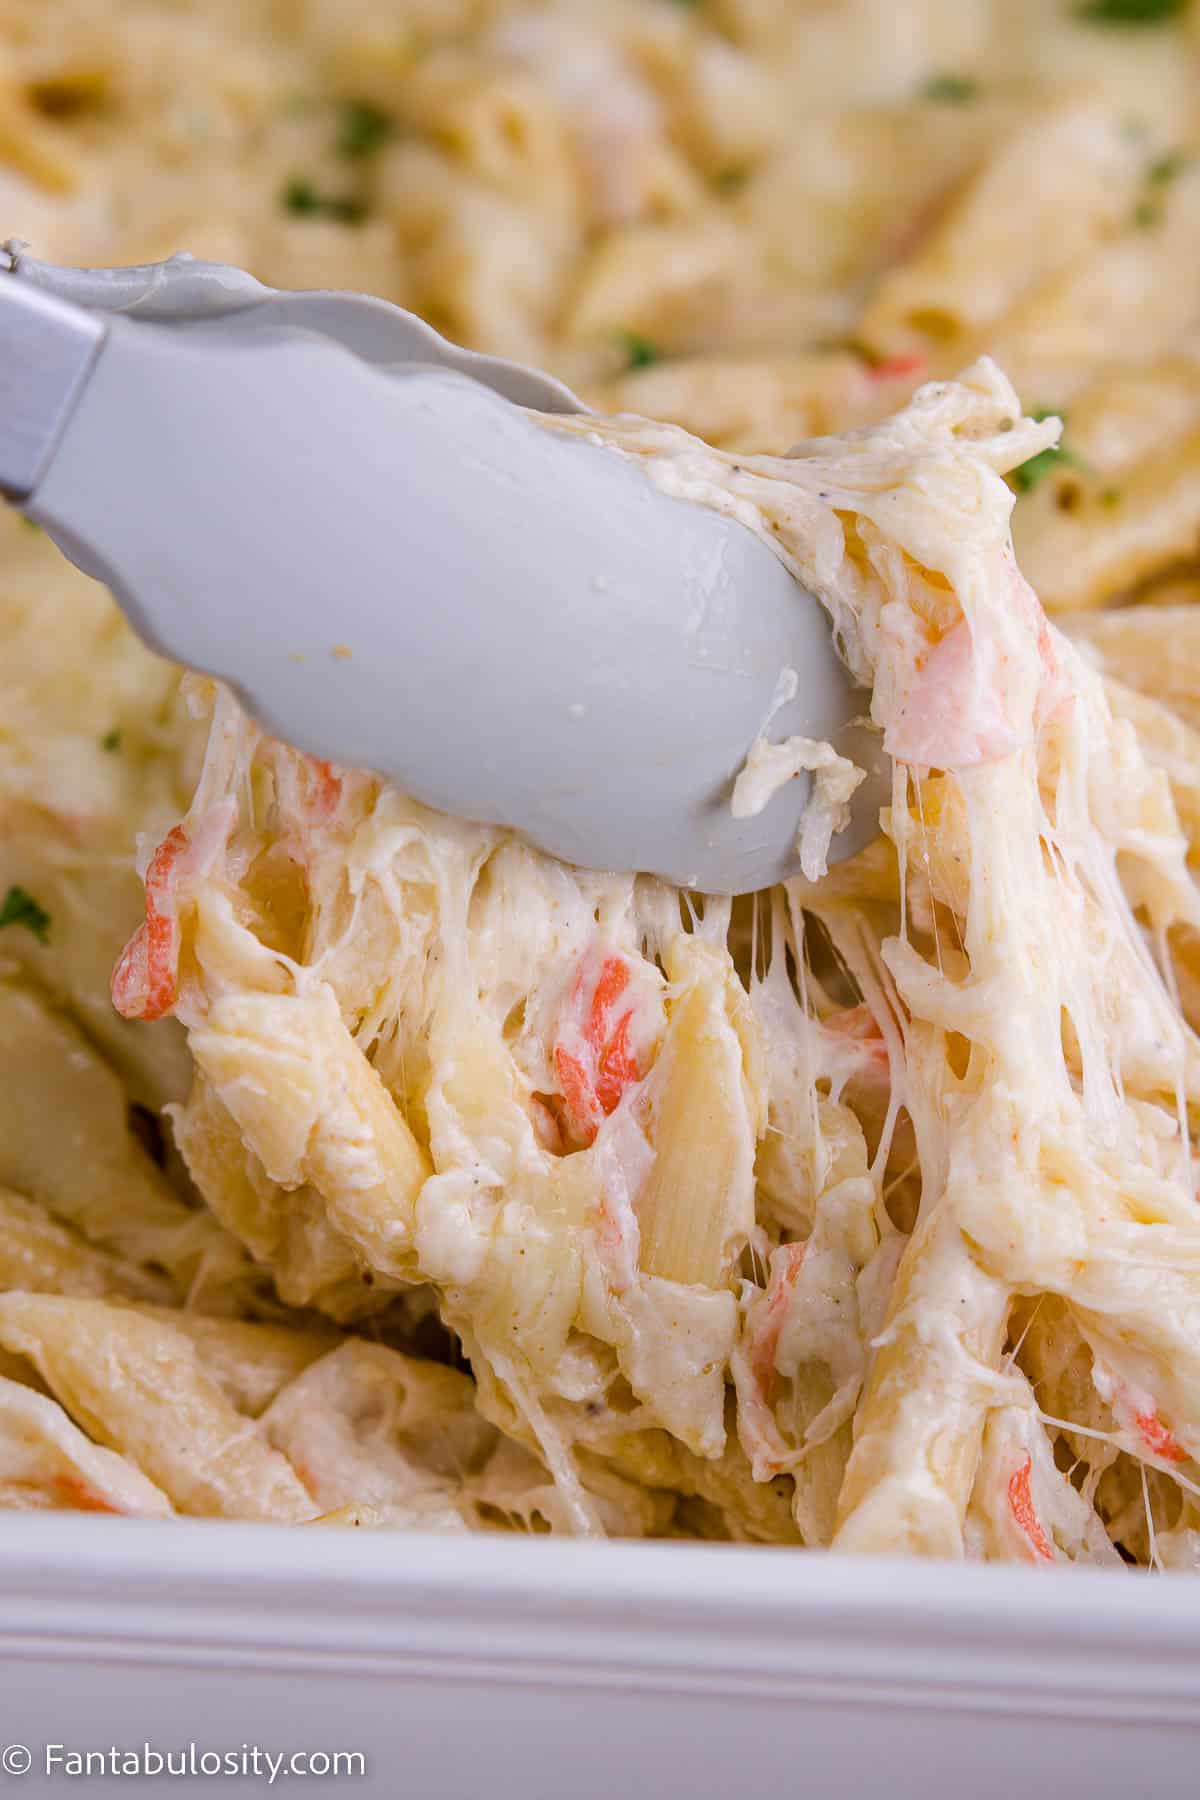 Crab pasta bake being pulled up out of dish with tongs.